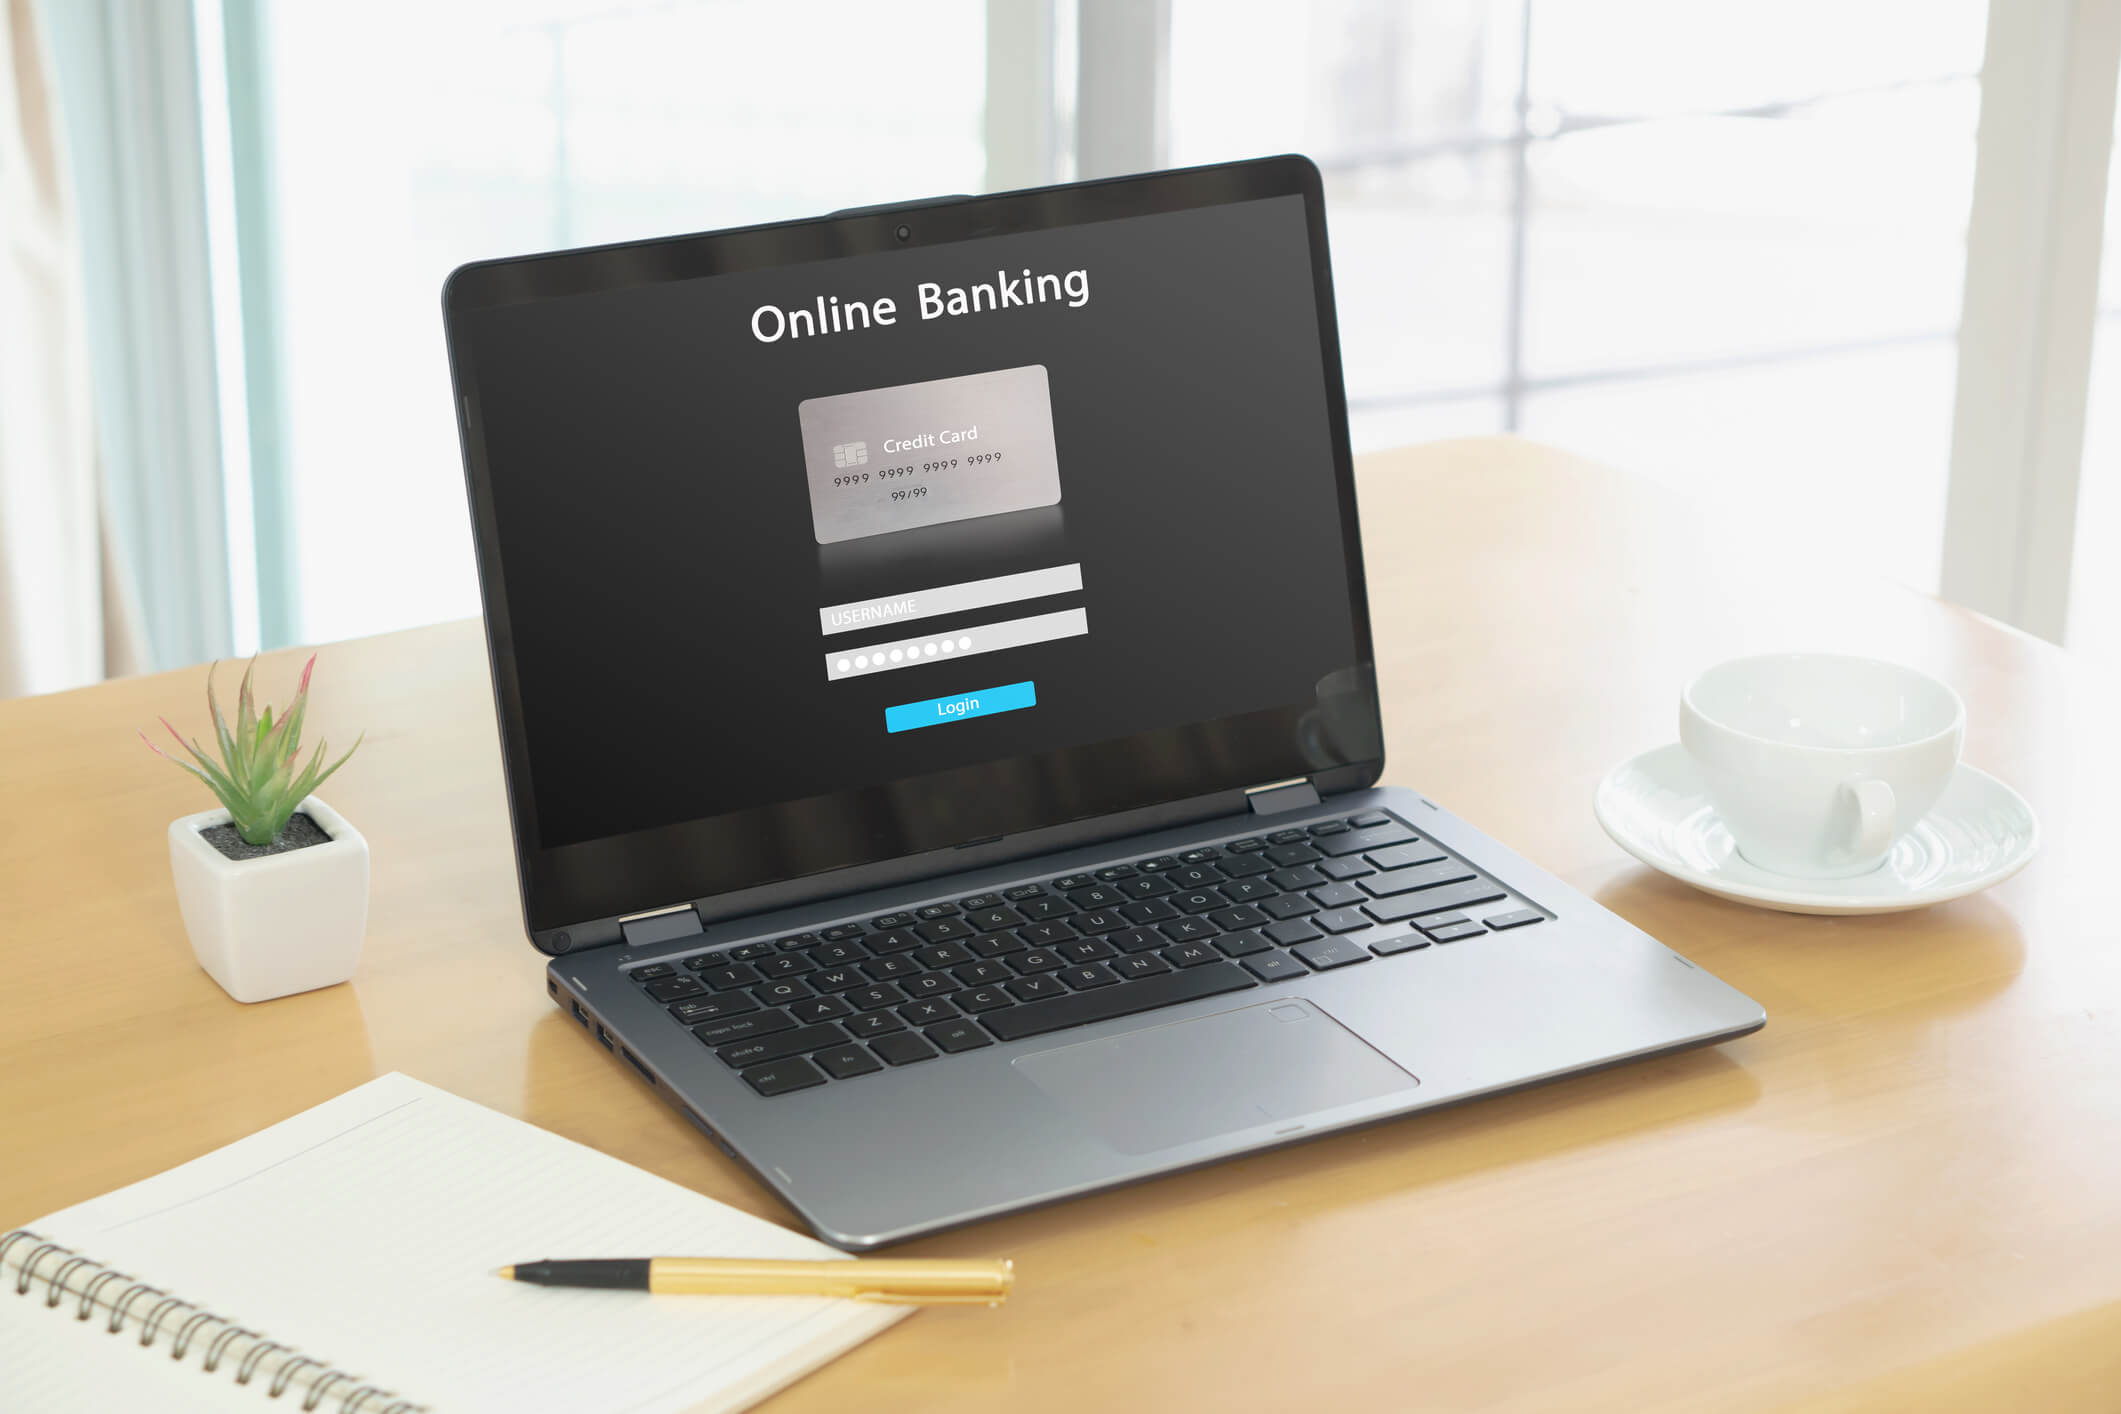 Online Banking - Complete Controller